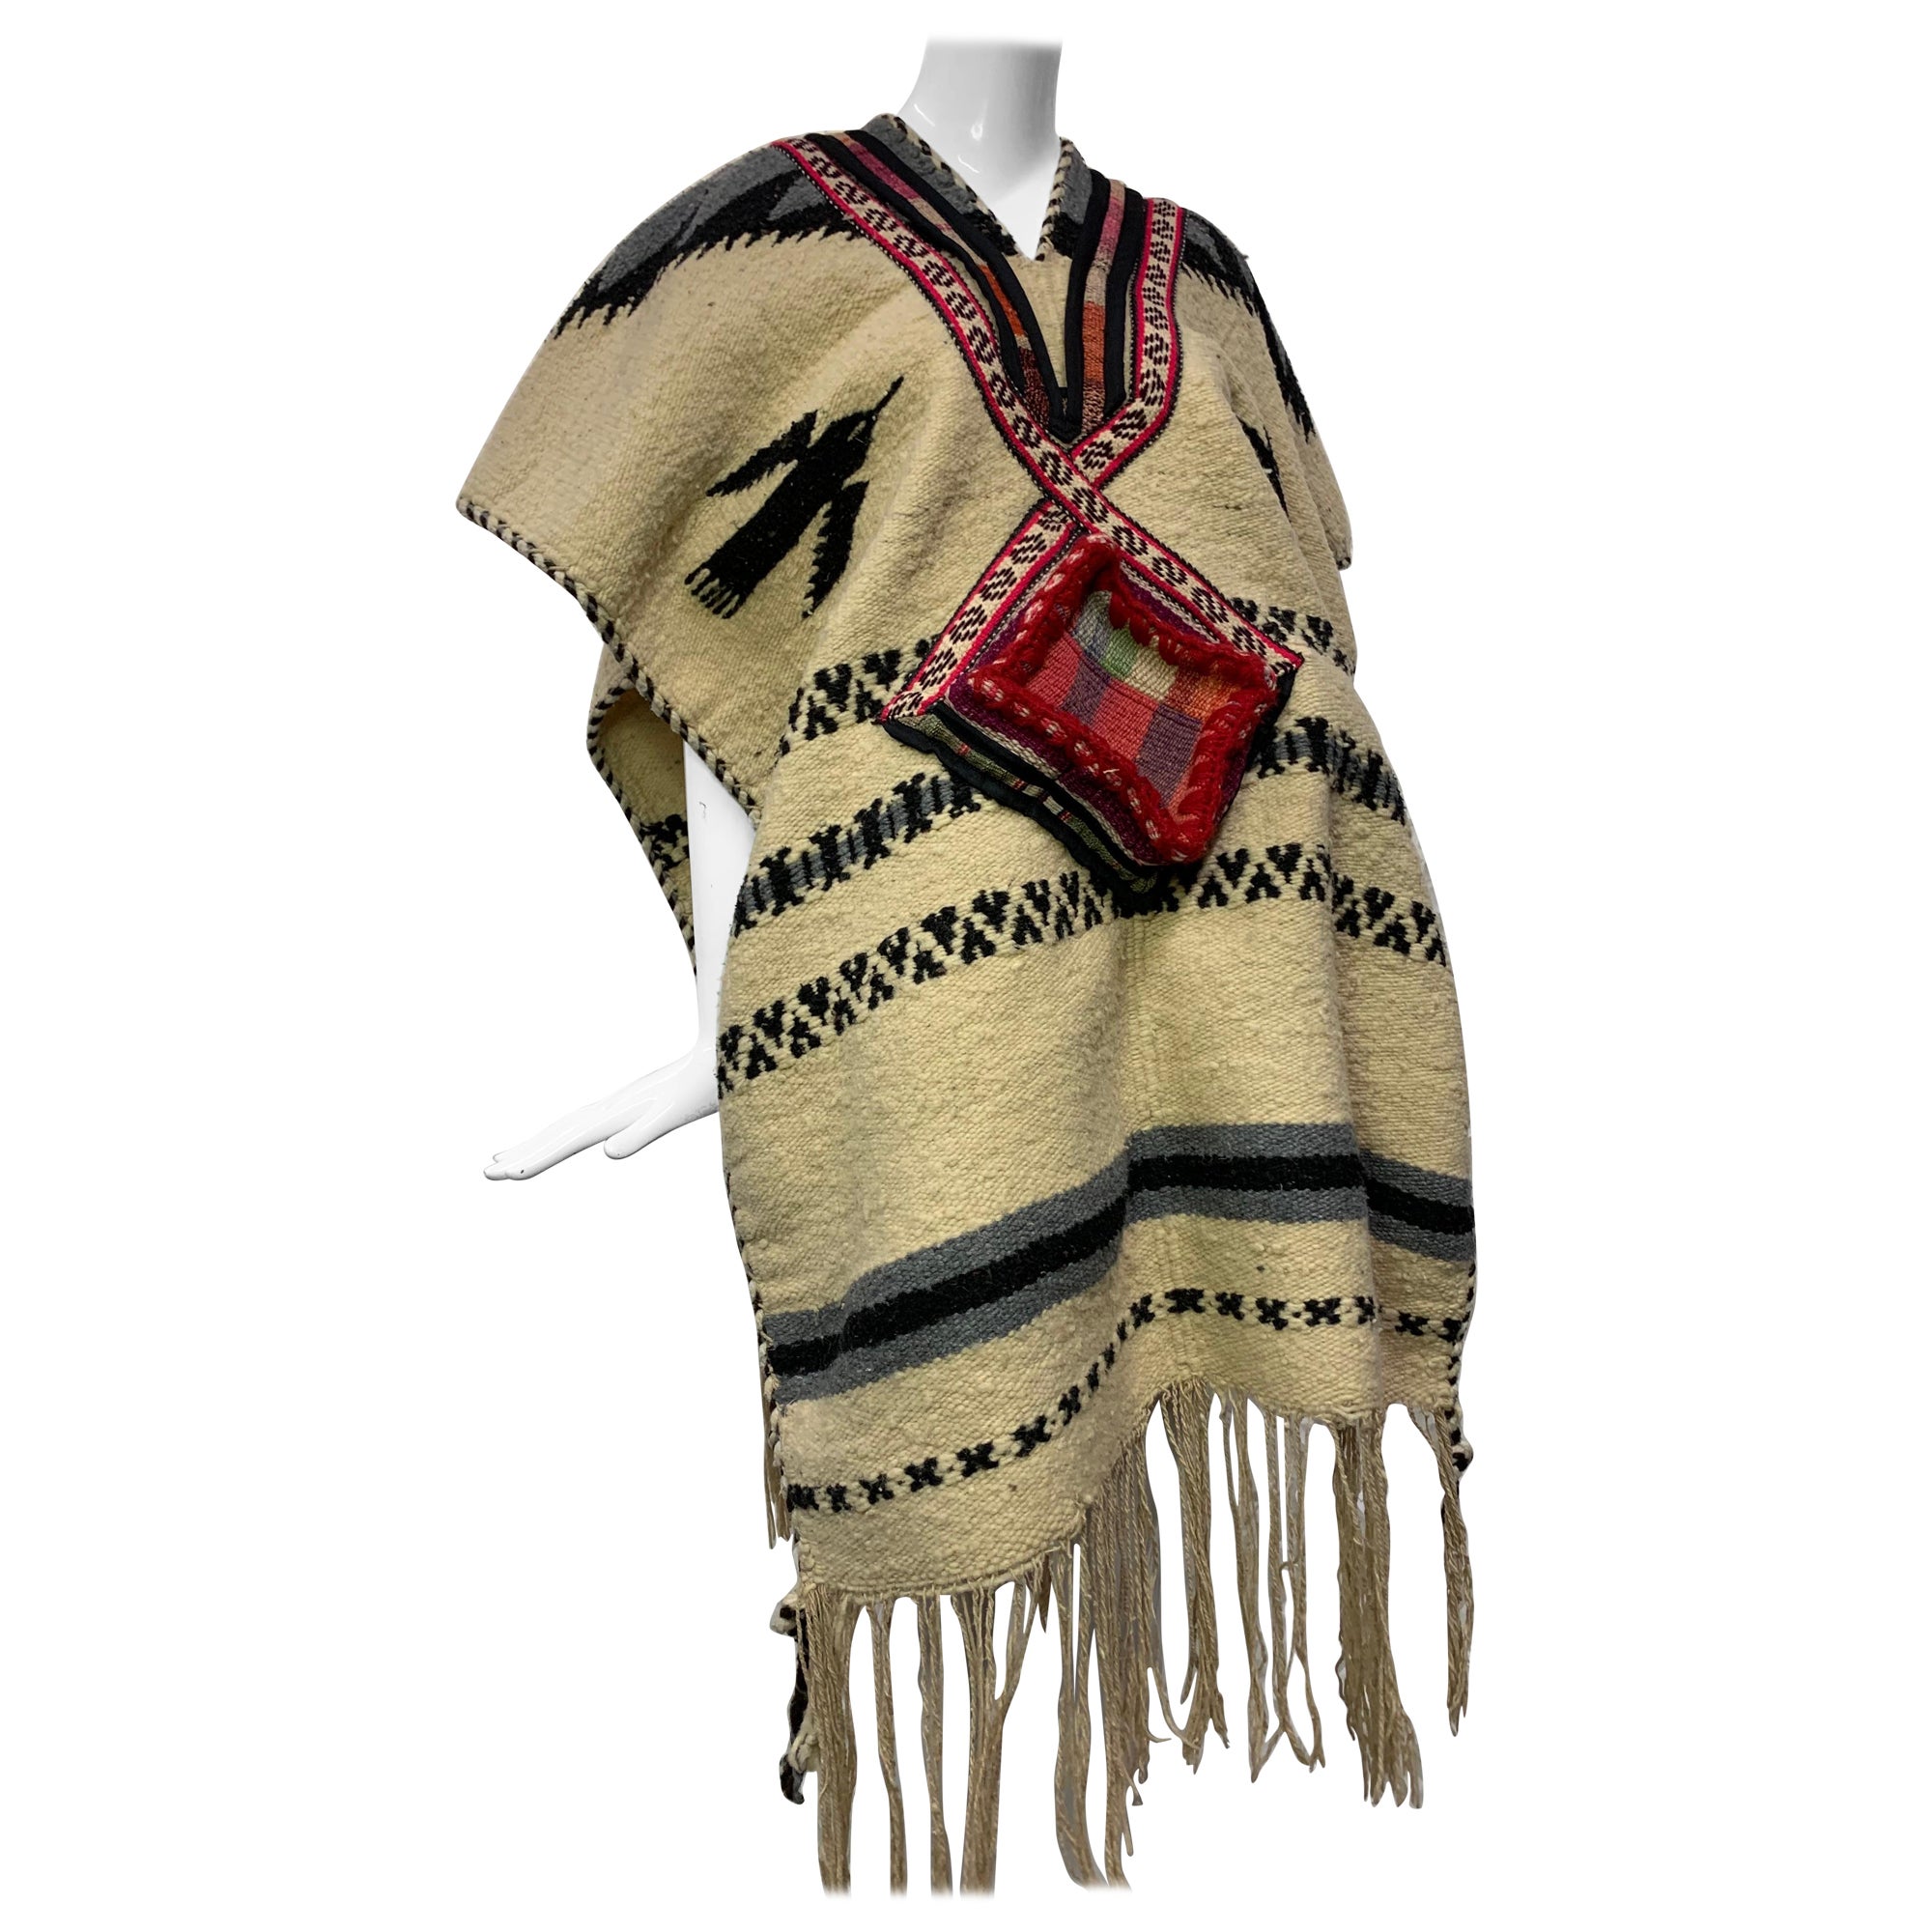 Torso Creations Hand-Woven Folkloric Poncho w Colorfully Woven Pouch Pockets For Sale